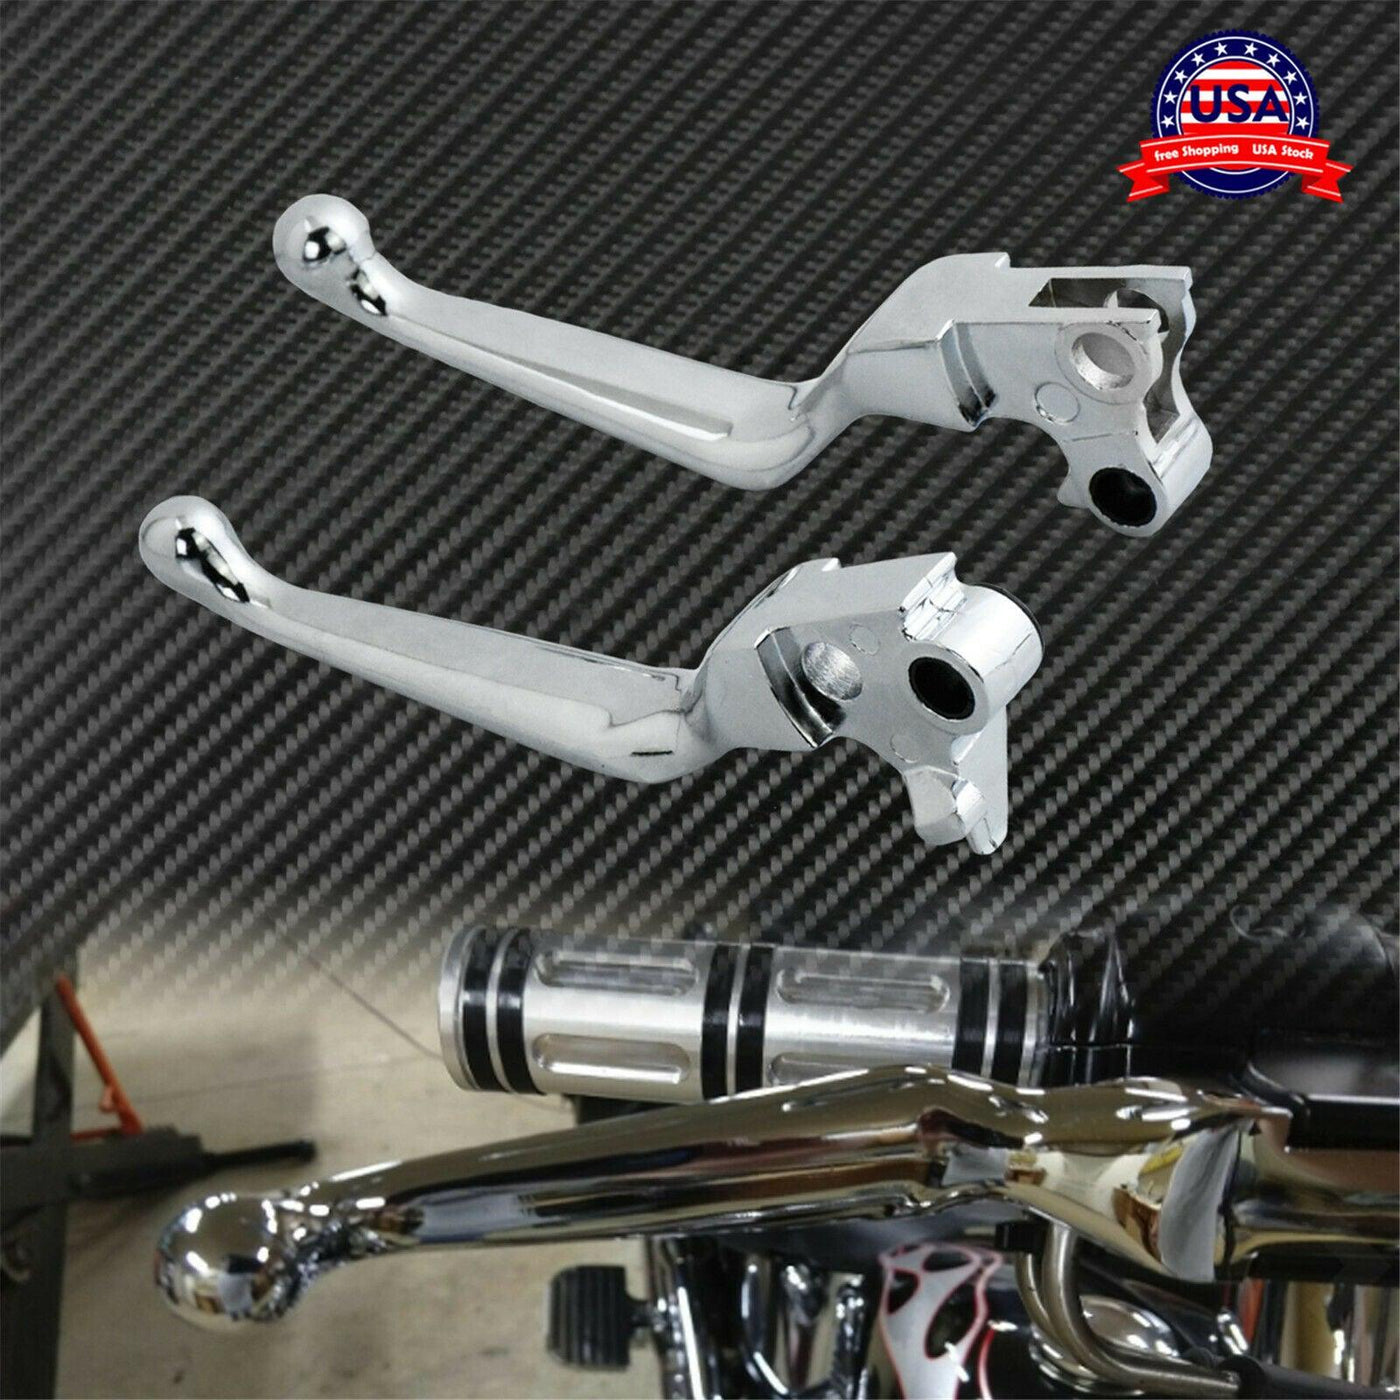 Chrome Brake Clutch Levers Fit For Harley Sportster Softail Dyna Touring 96-07 - Moto Life Products